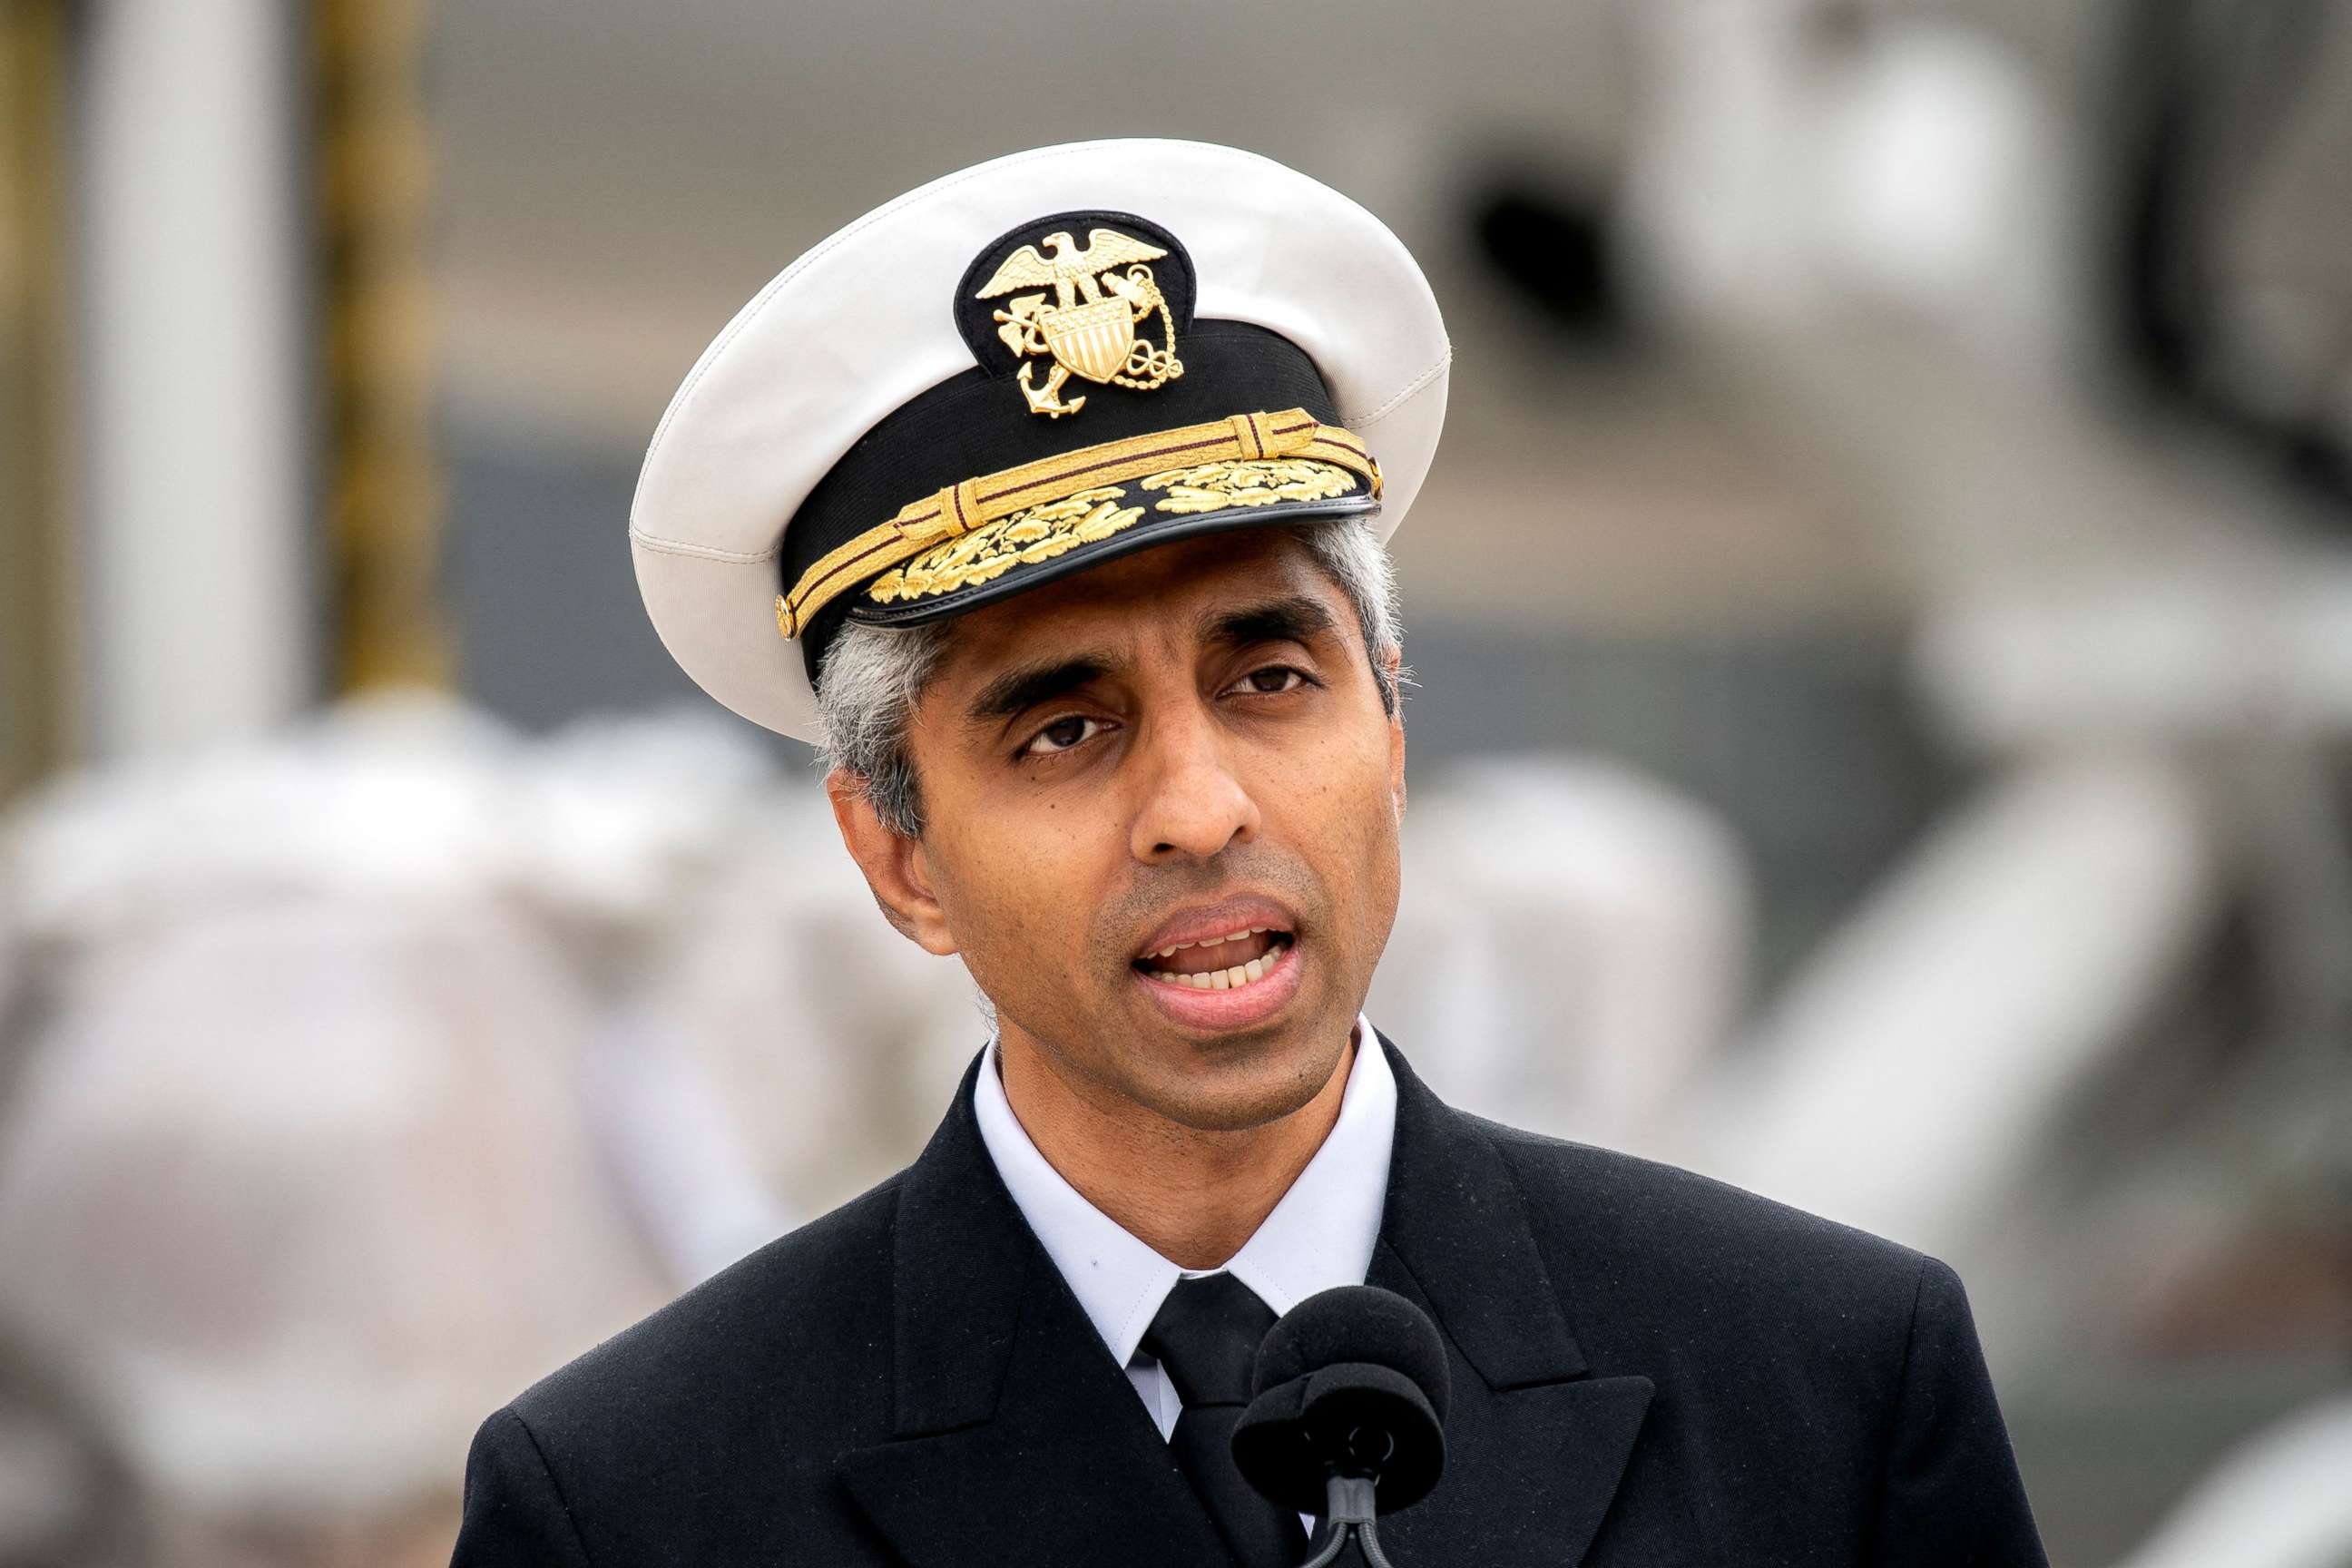 PHOTO: U.S. Surgeon General Vivek Murthy delivers remarks after a shipment of infant formula, sent in through Operation Fly Formula, arrived at Dulles International Airport in Dulles, Virginia, on May 25, 2022.